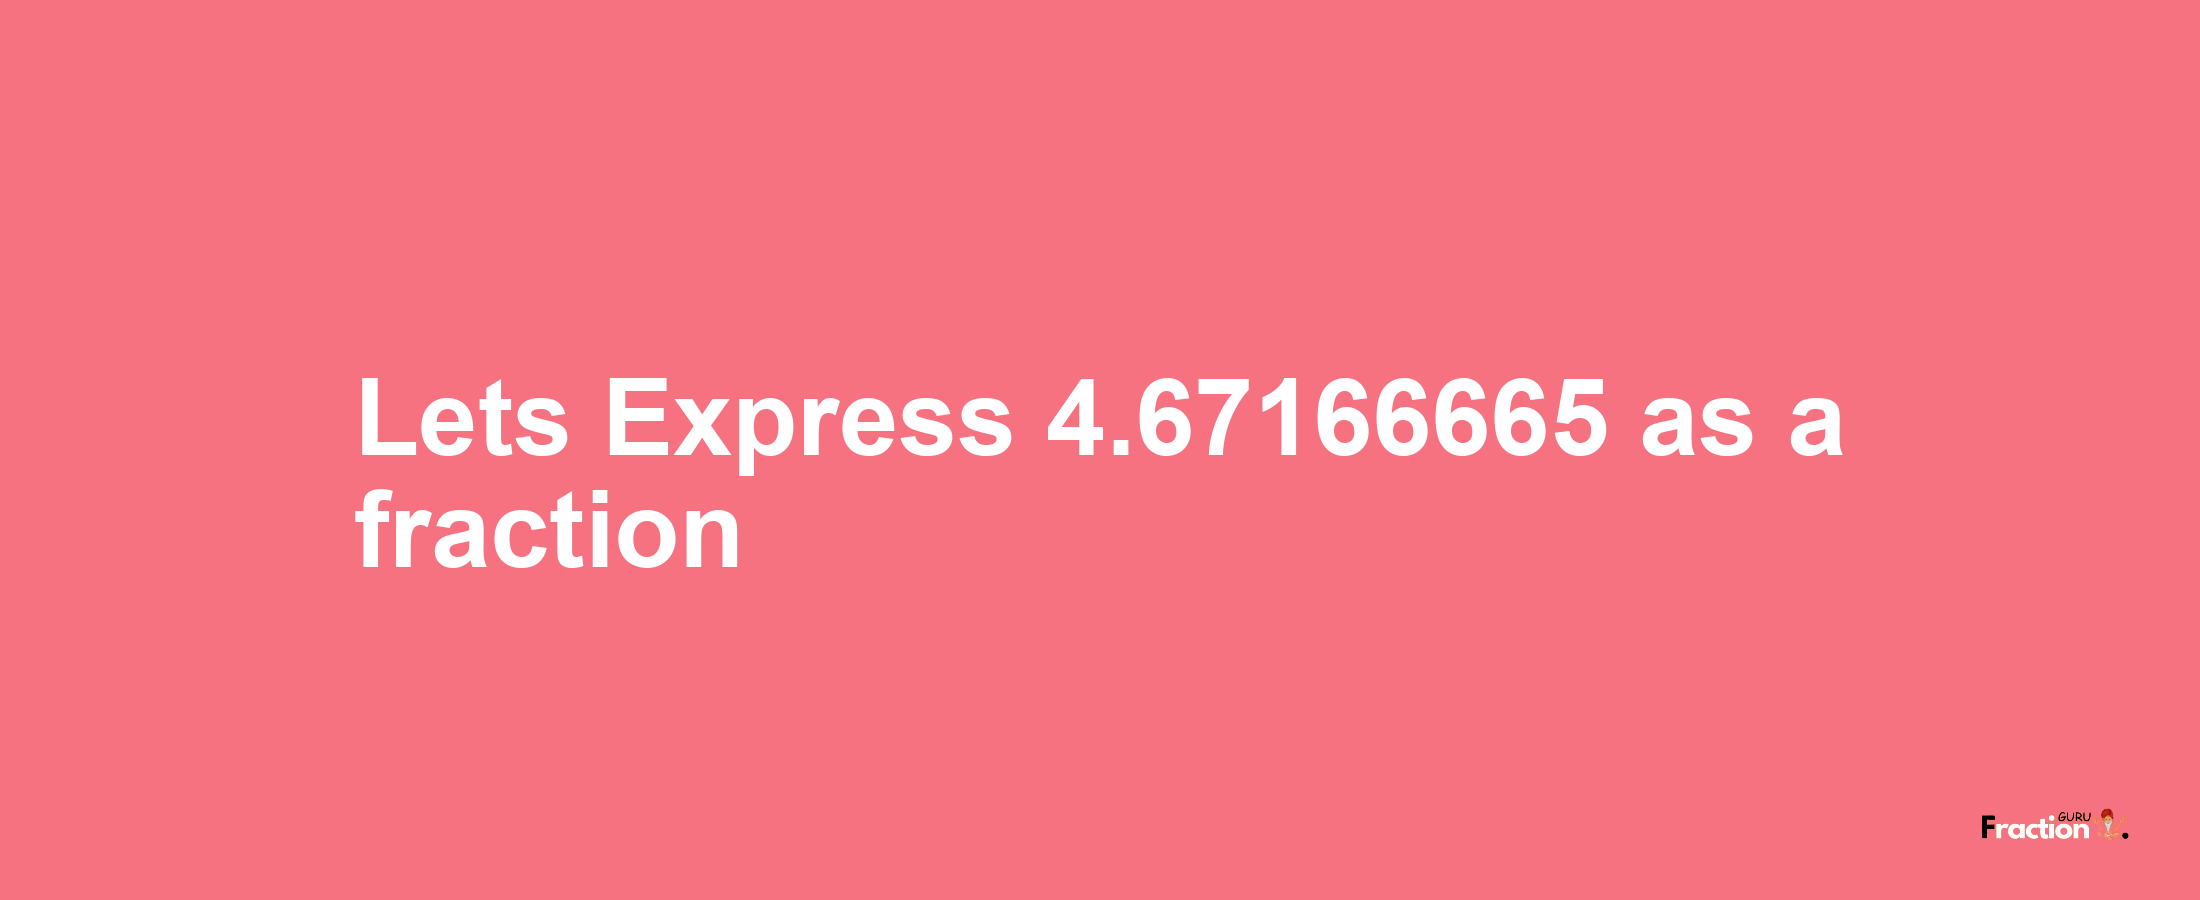 Lets Express 4.67166665 as afraction